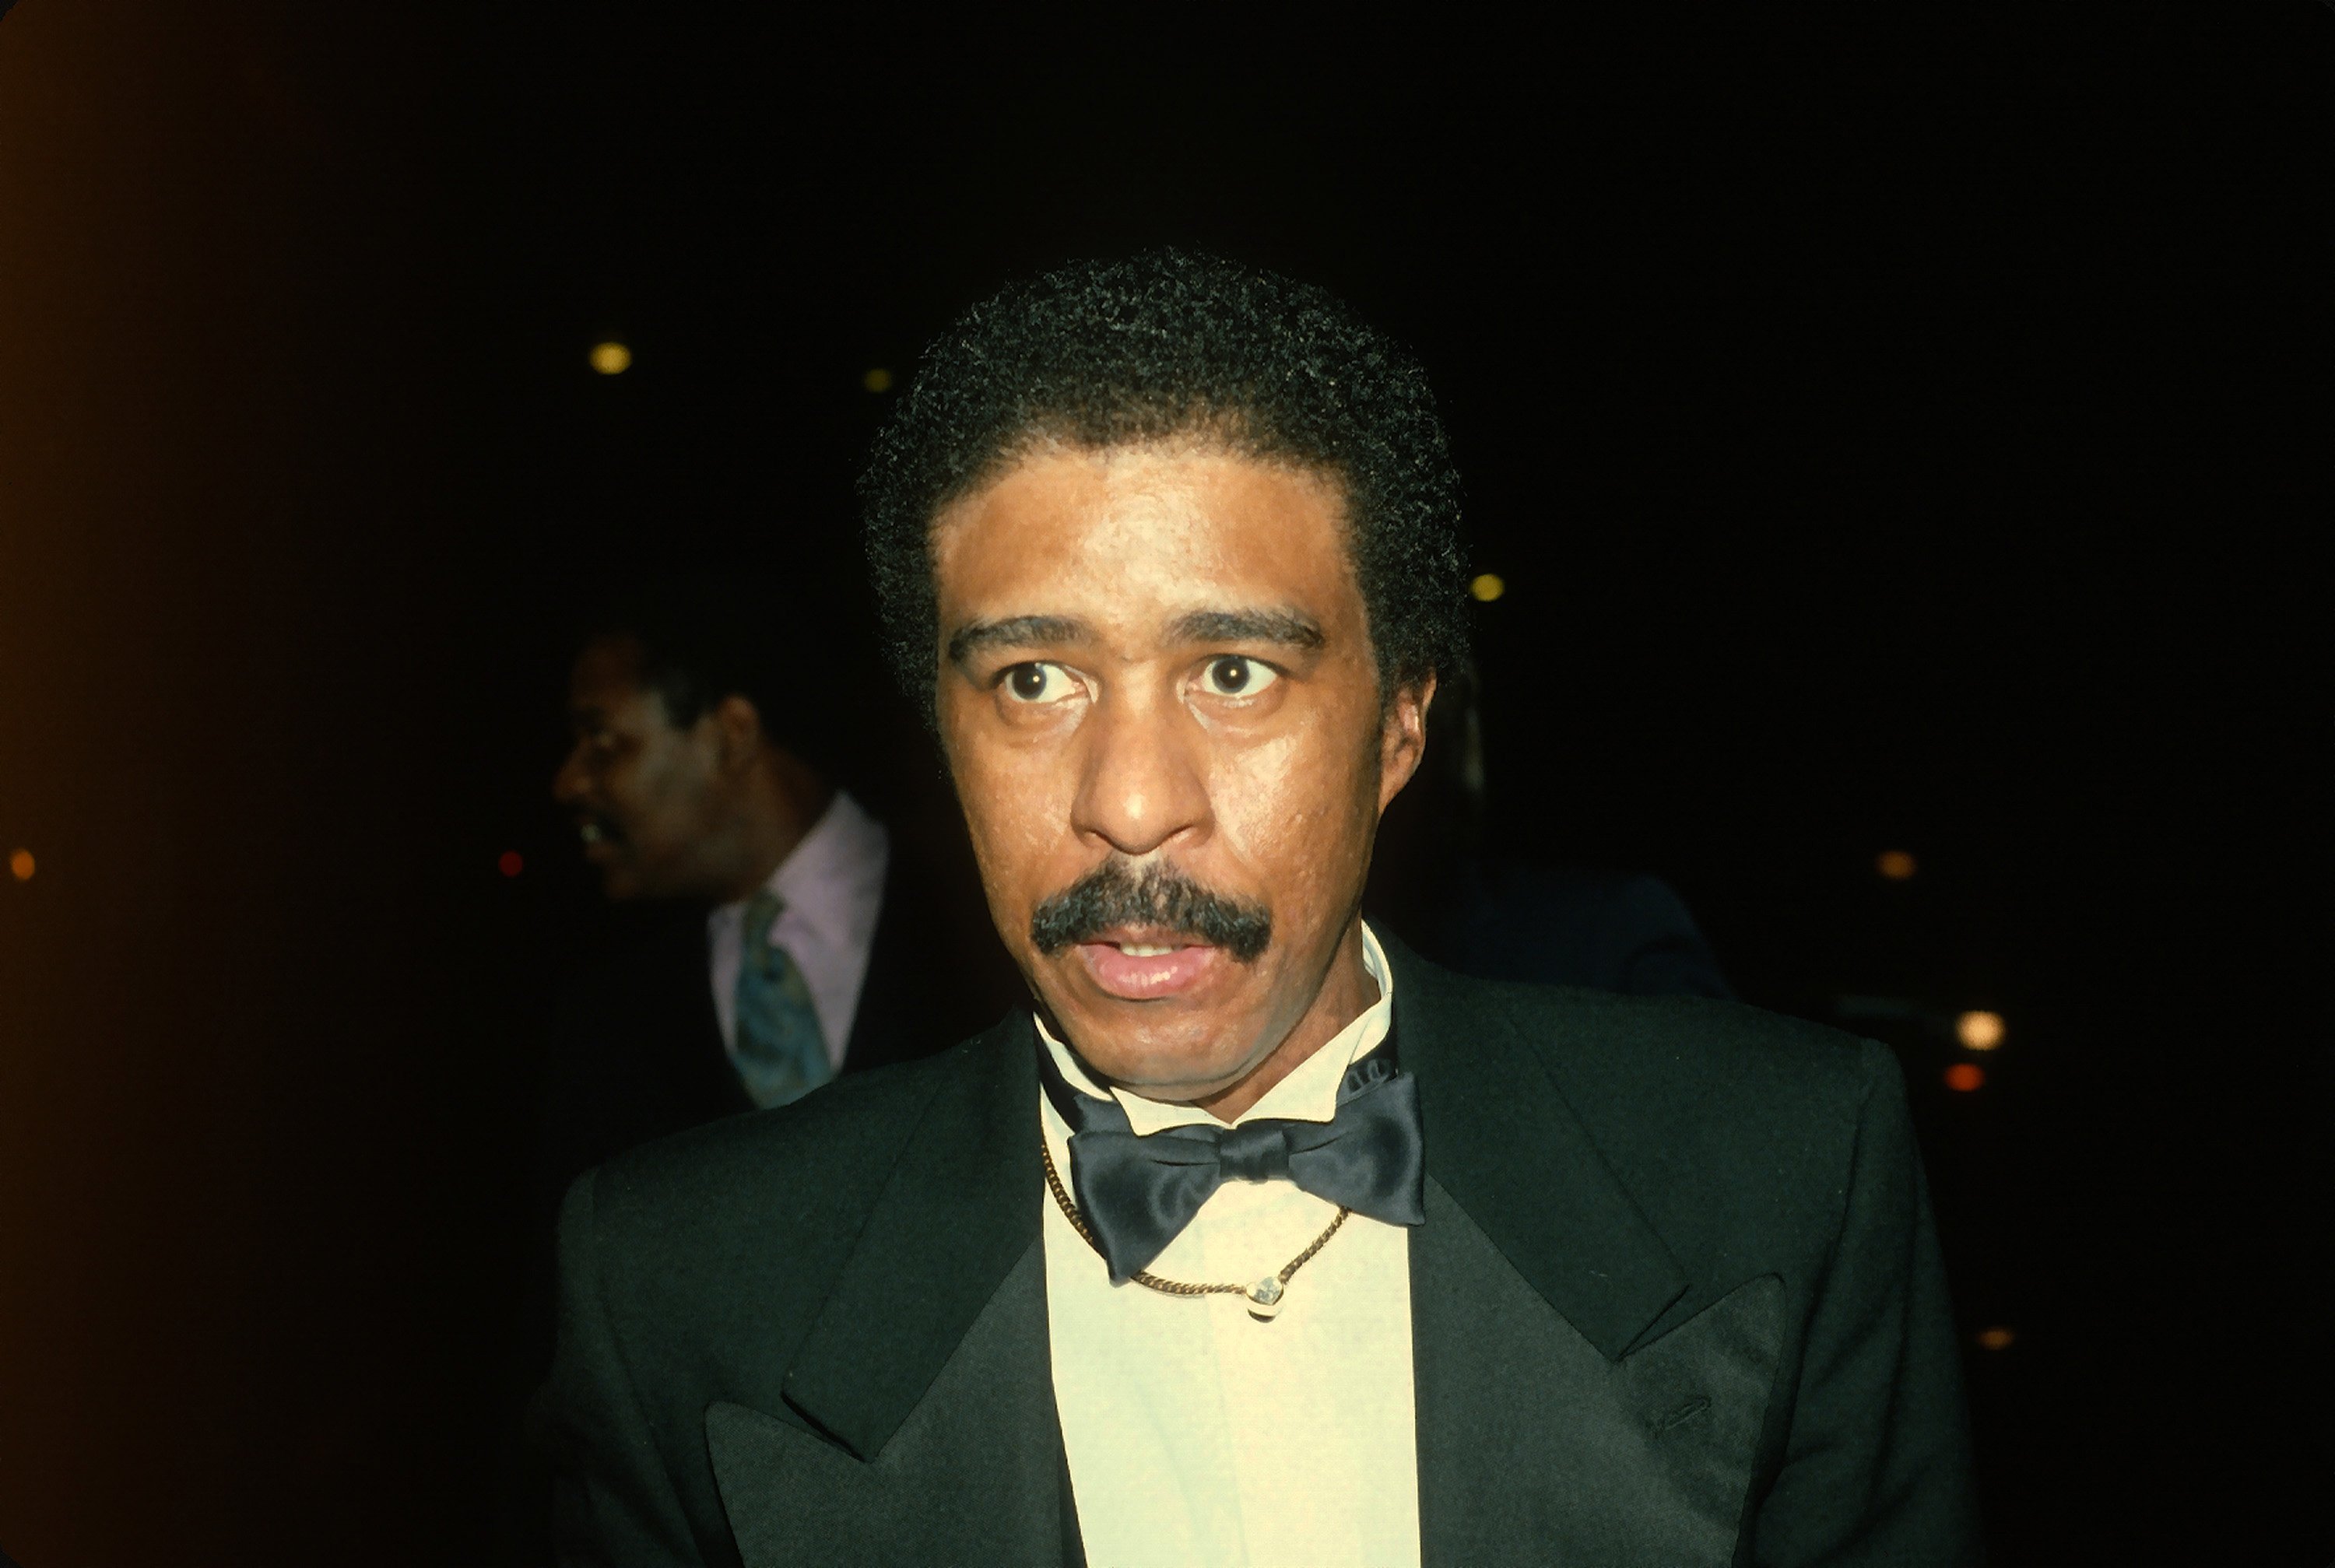 Richard Pryor attending the "Night of 100 Stars" in March 1982 in New York City. | Photo: Getty Images